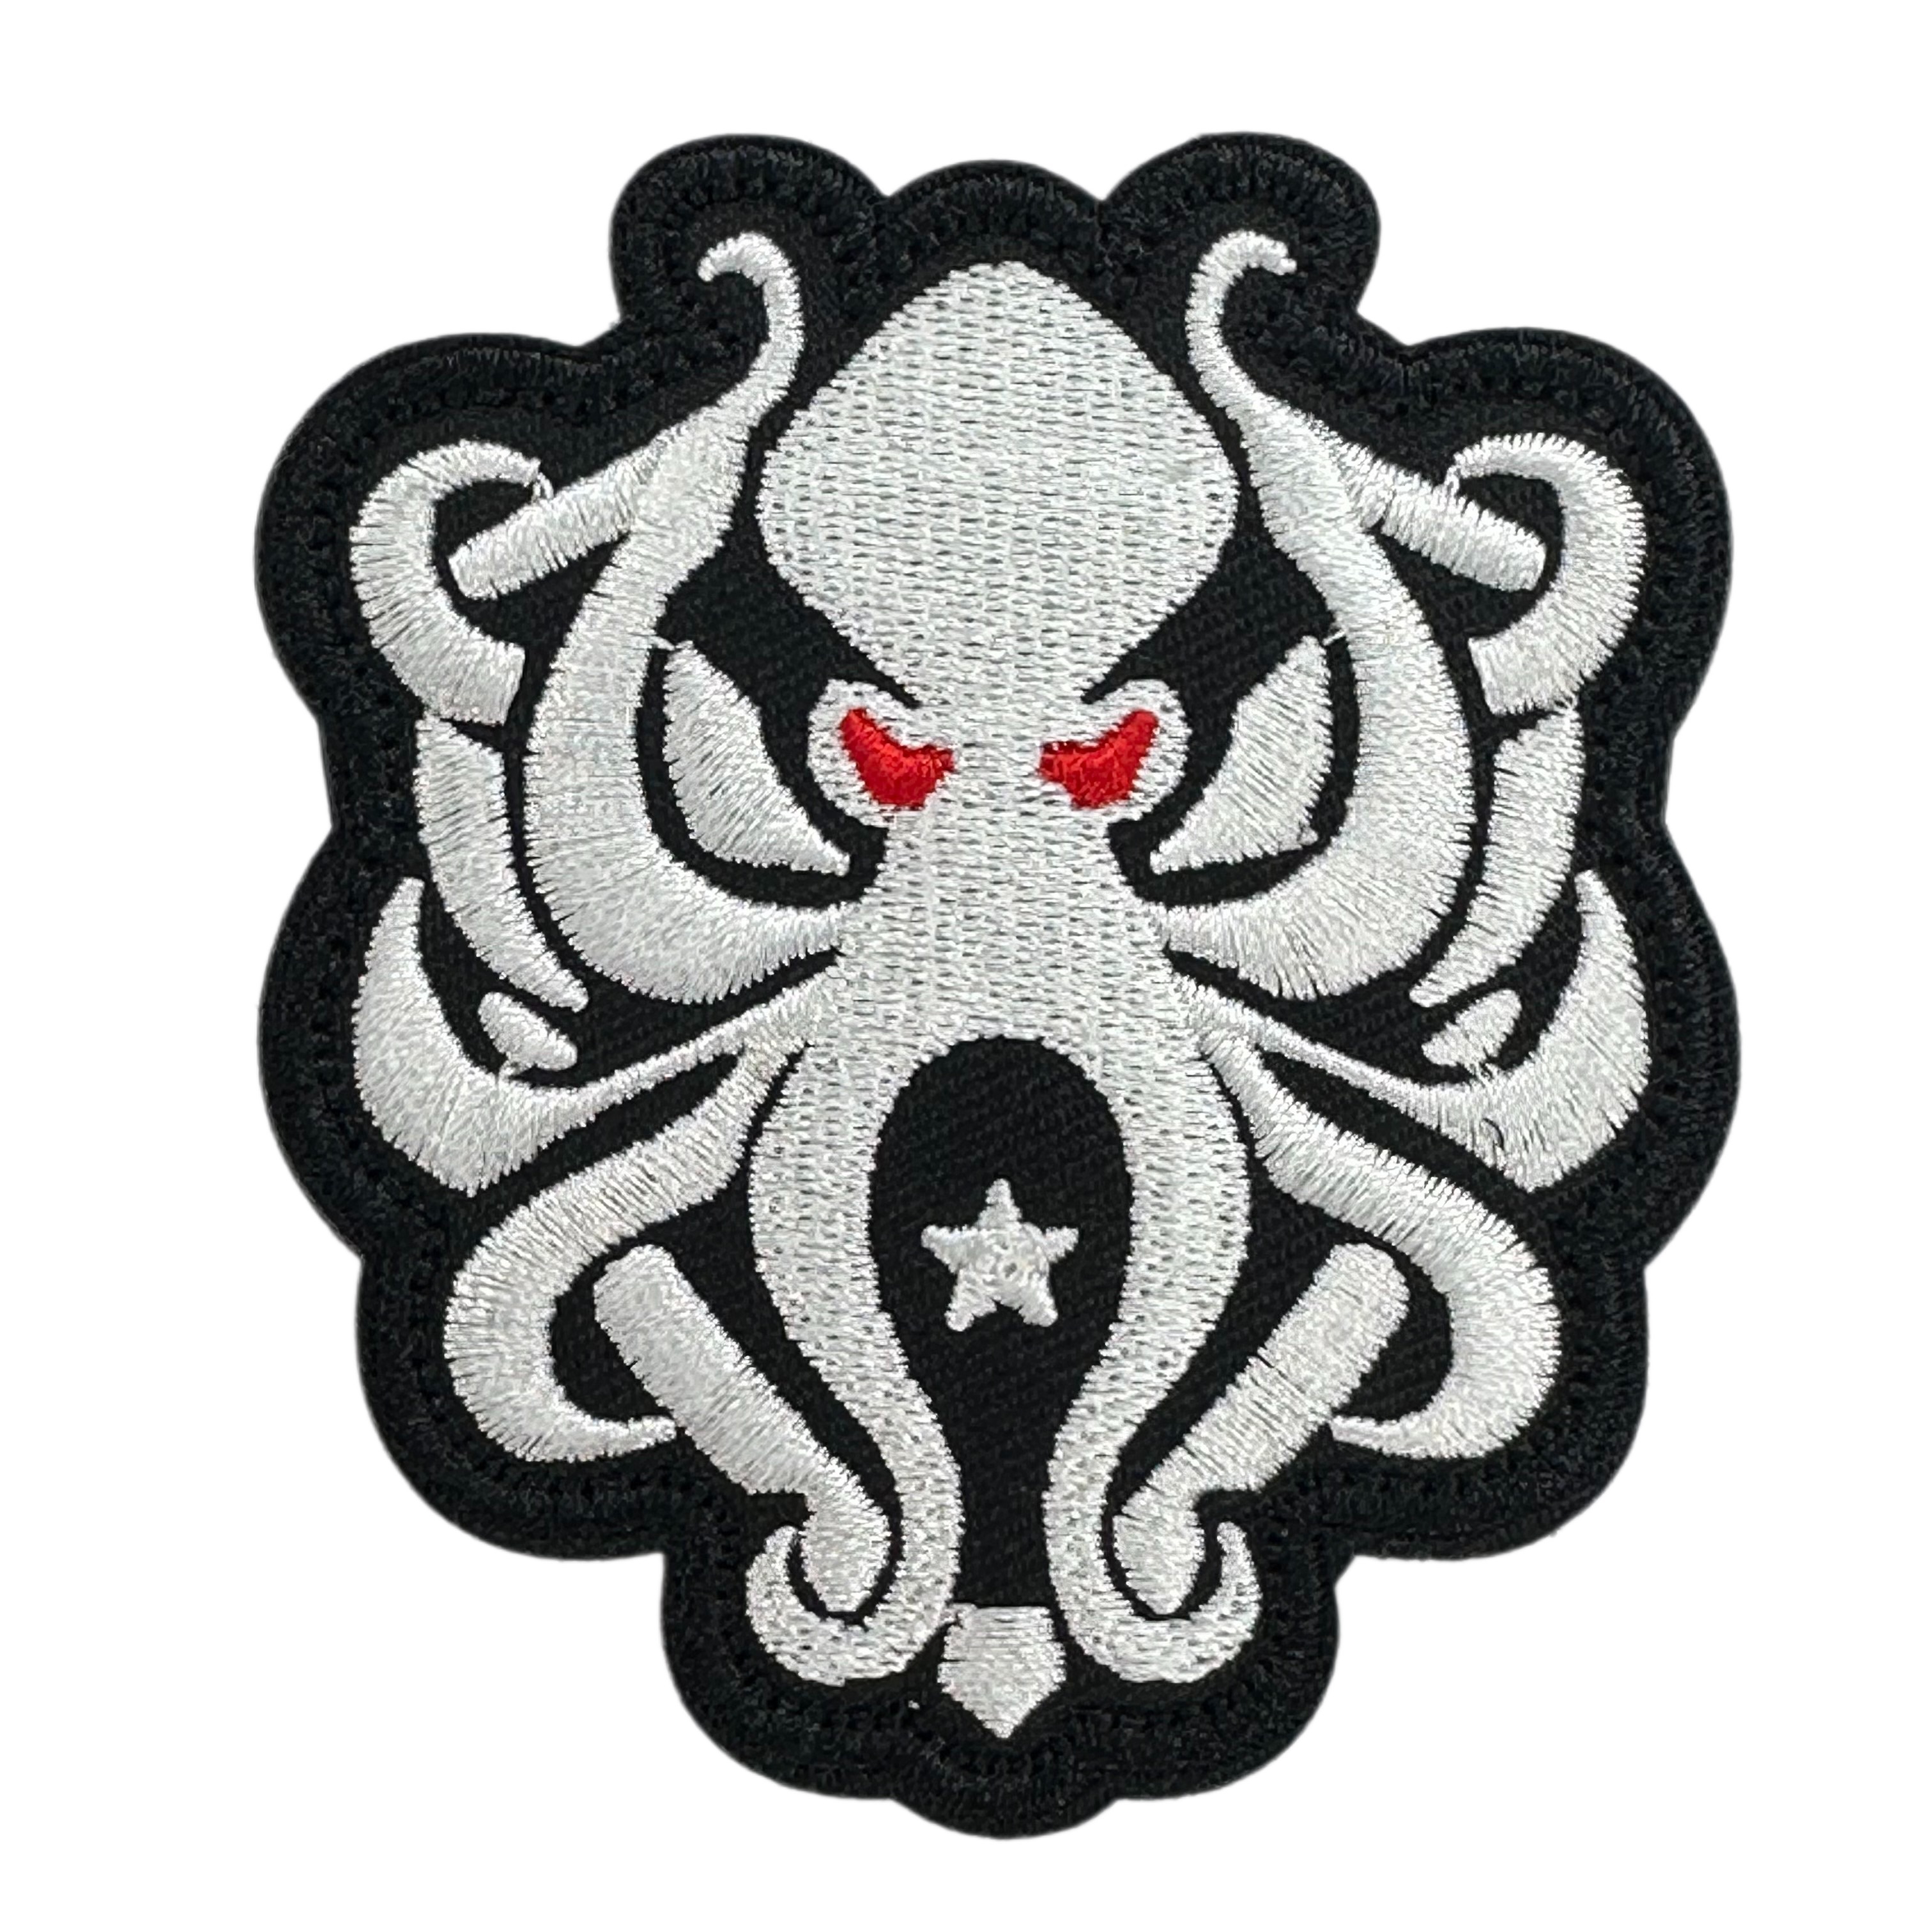 Embroidery Patch - Octupus Star